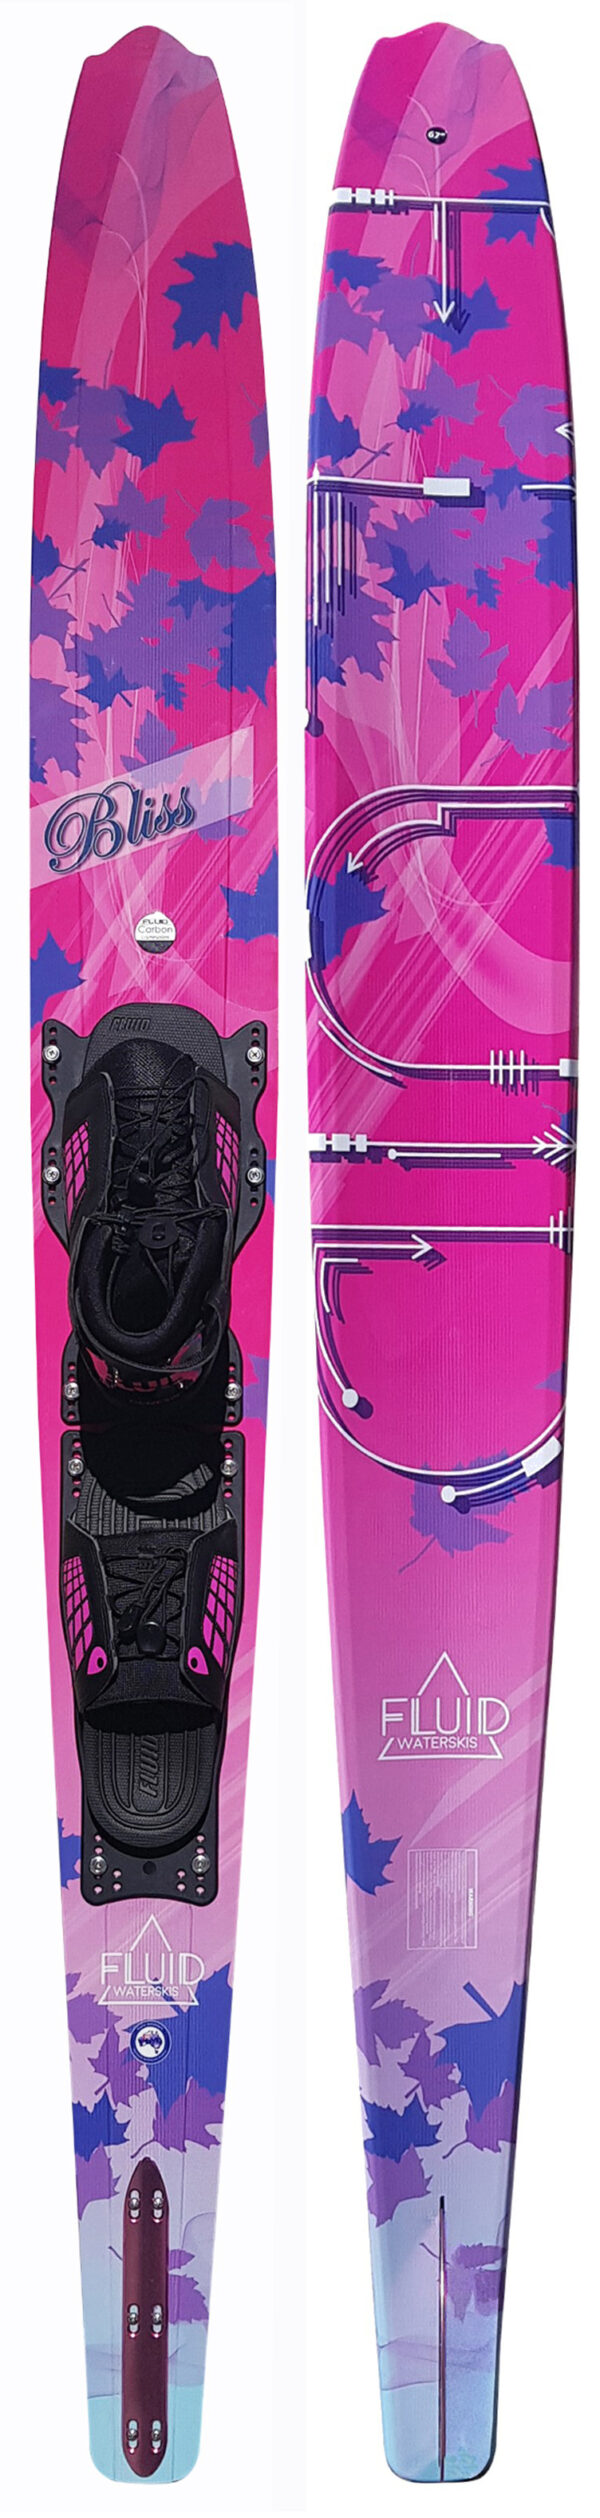 Fluid Bliss Womens Ski With Onset Boot and ARTP